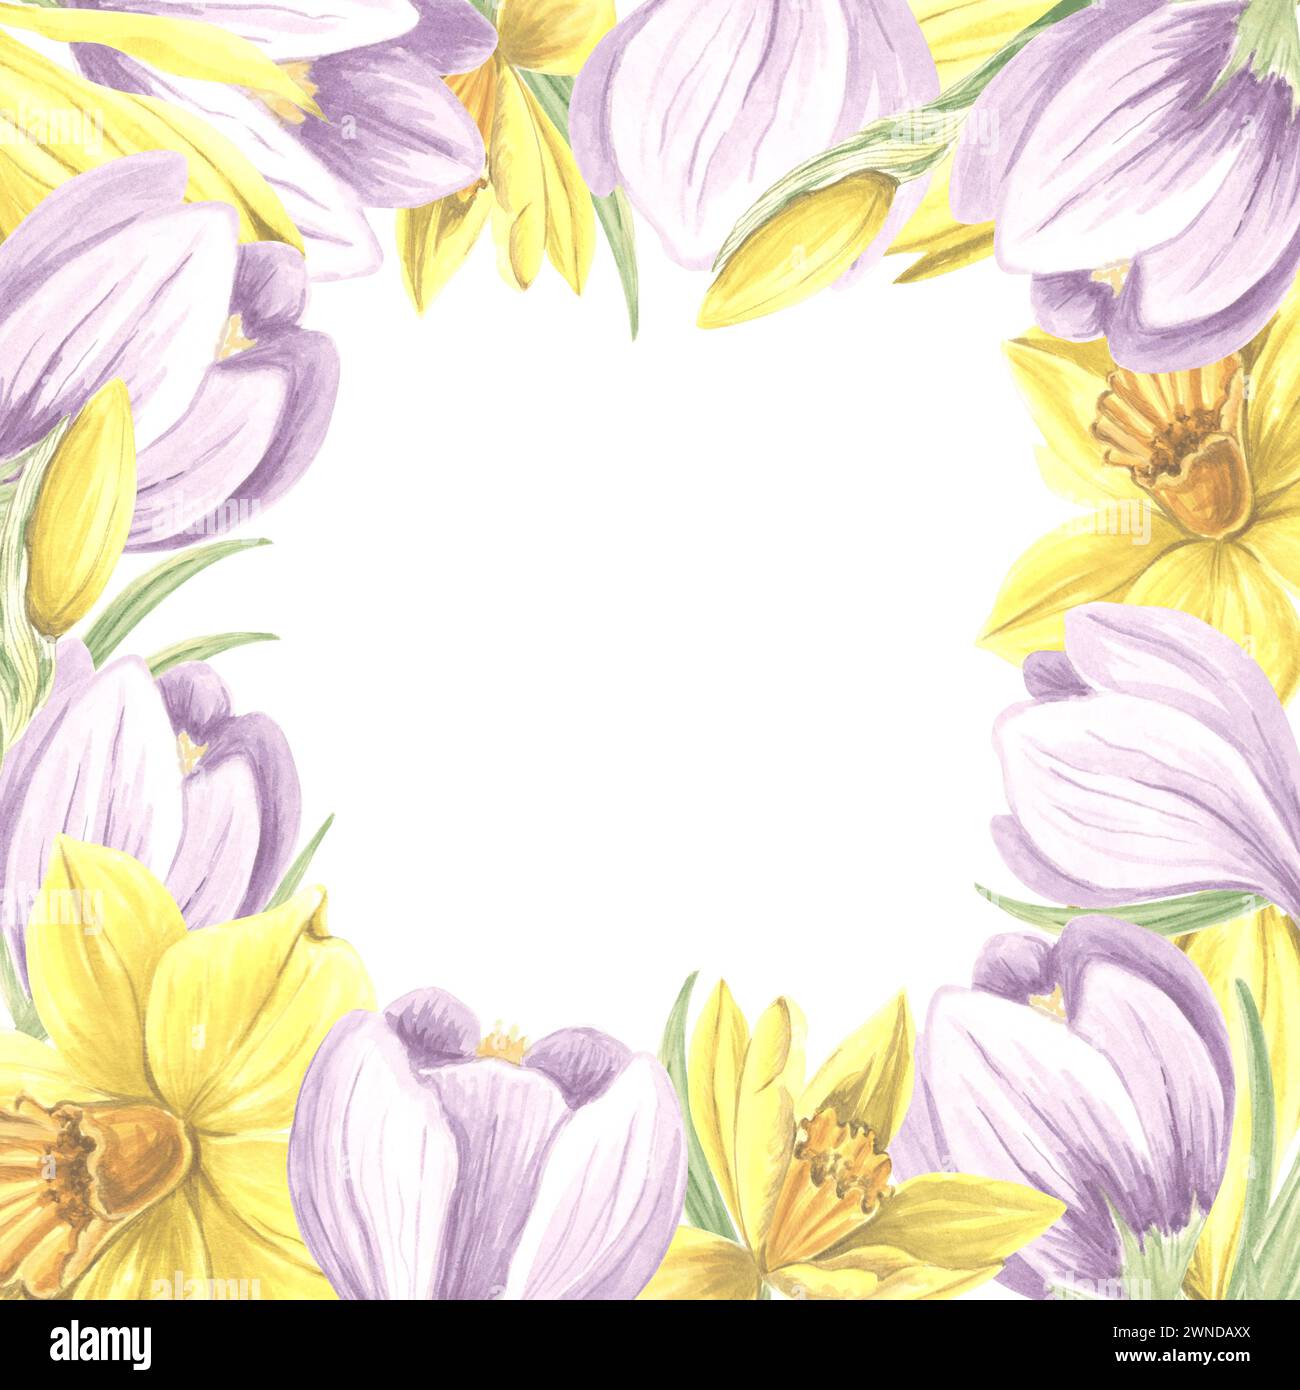 Square frame from purple crocuses and yellow daffodils flowers. Isolated hand drawn watercolor illustration of spring primroses. Template for design Stock Photo